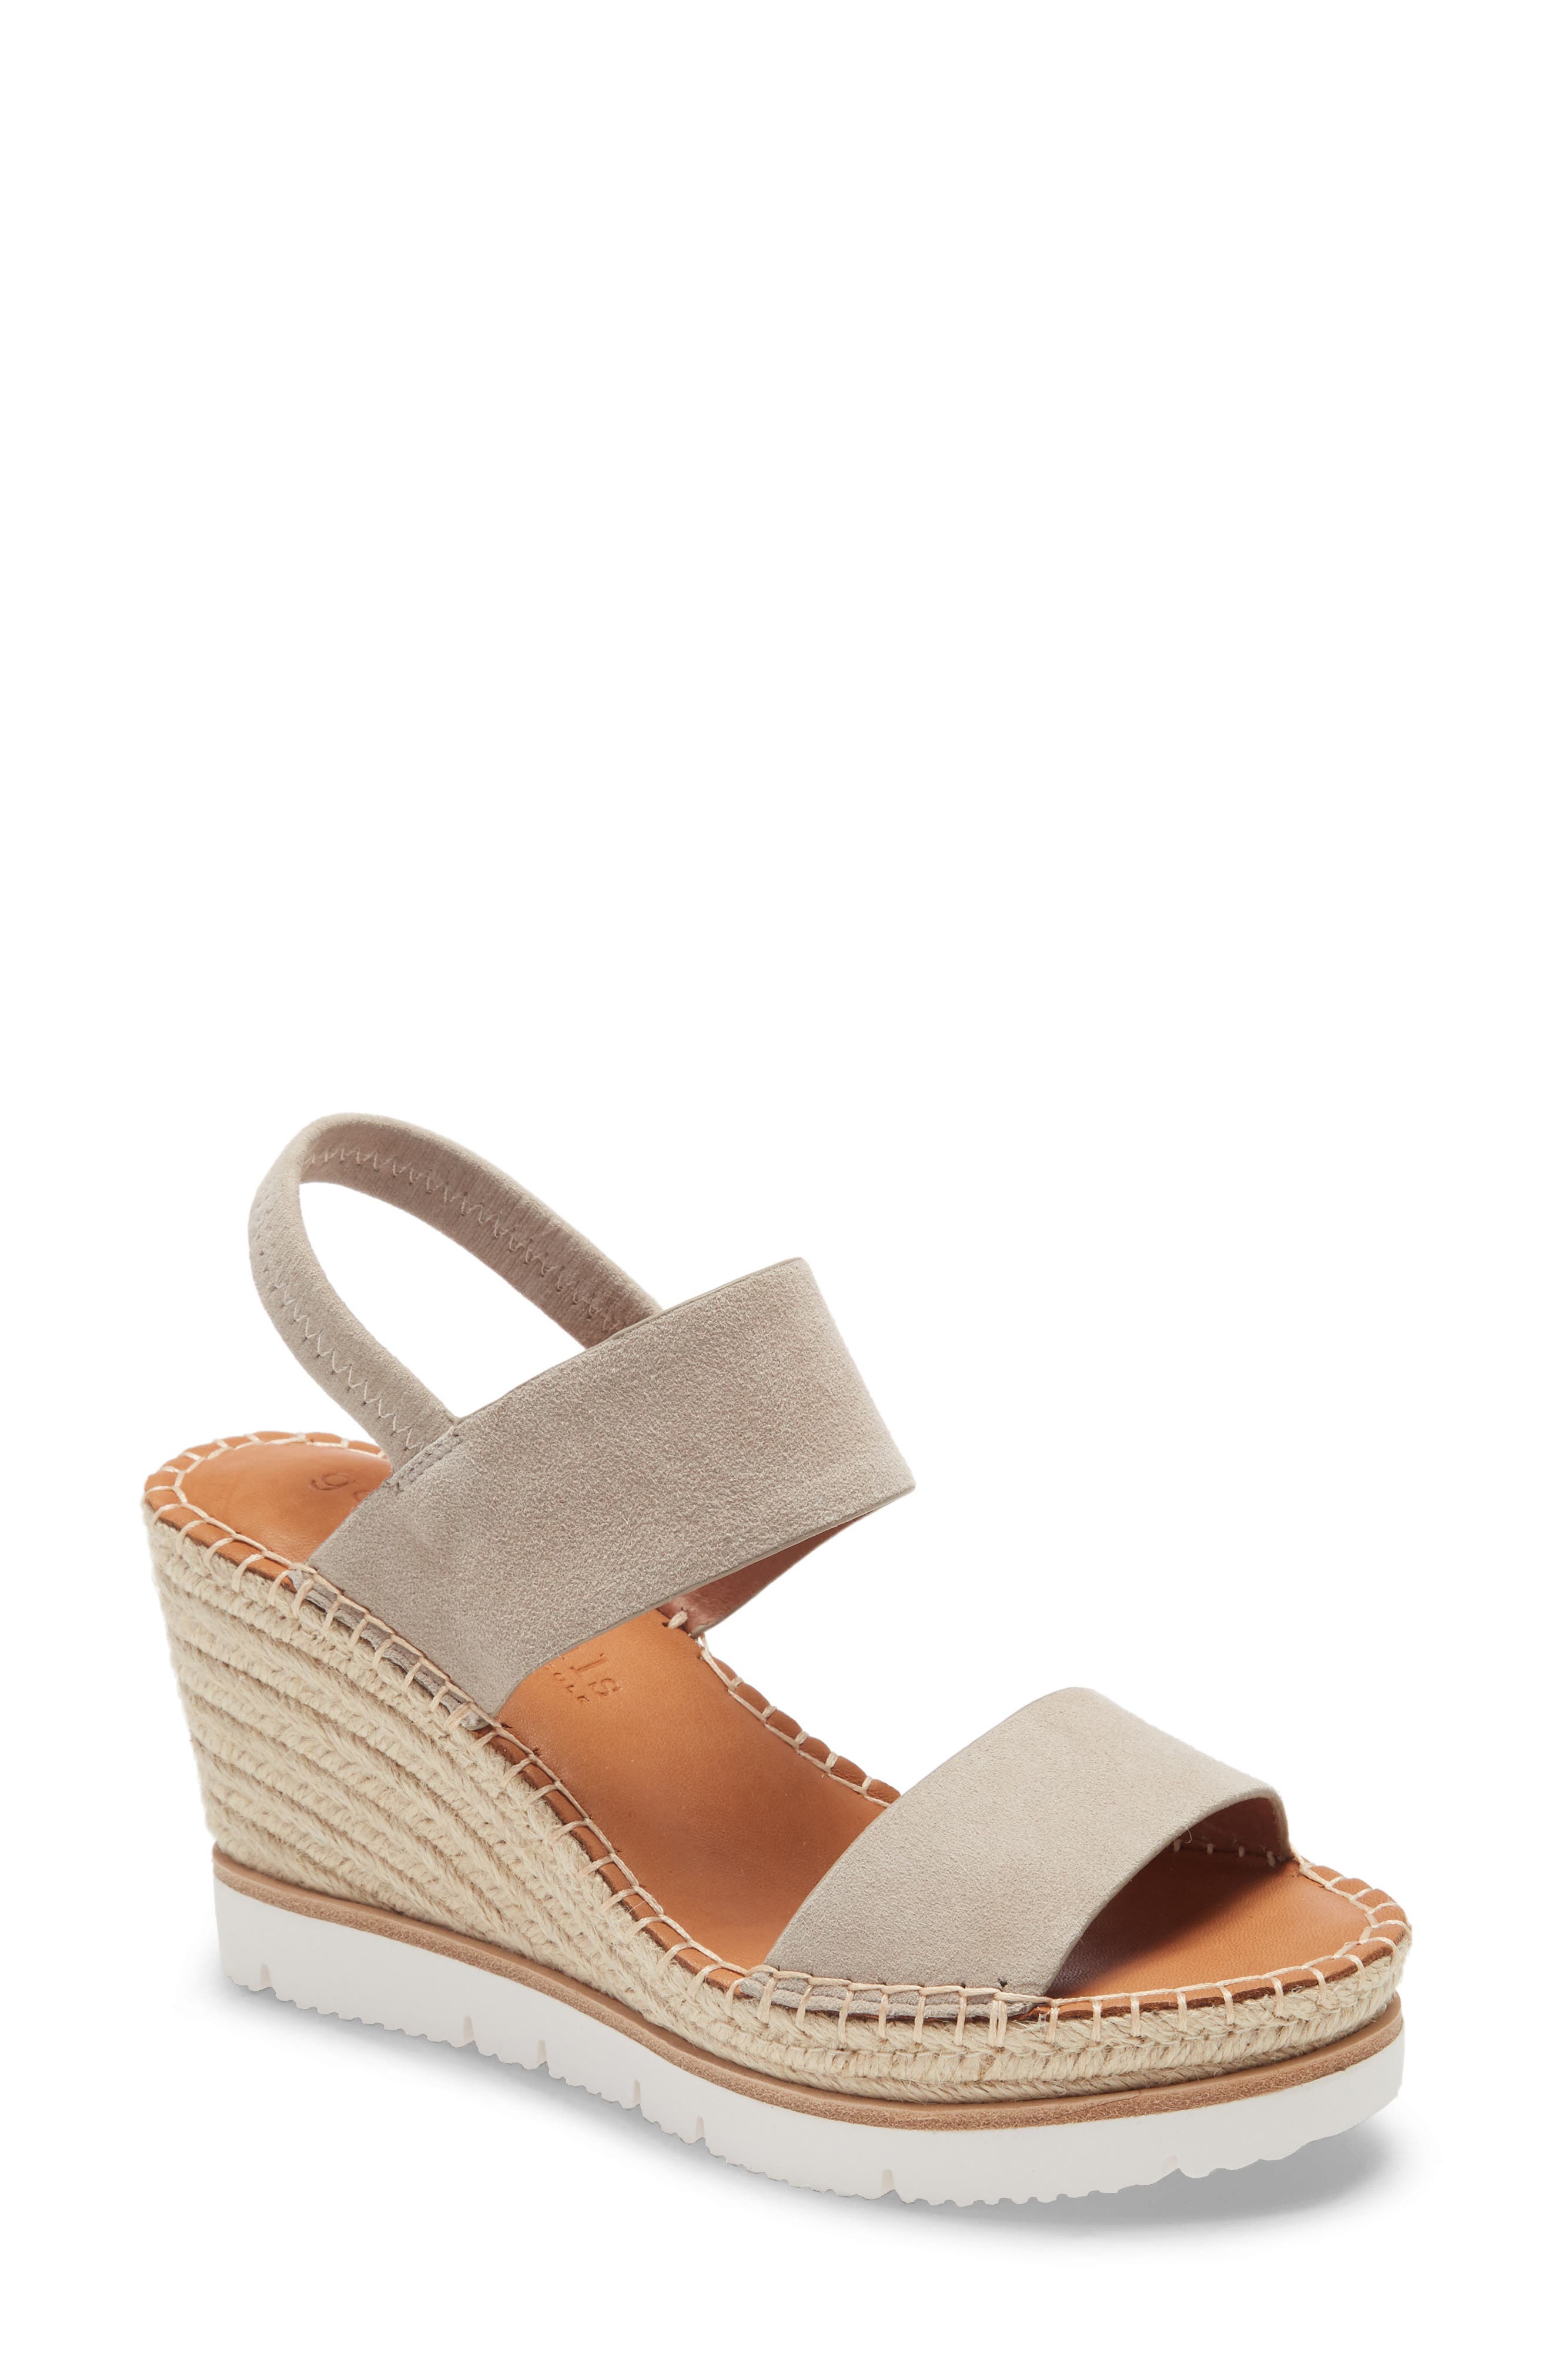 nordstrom women's shoes wedges